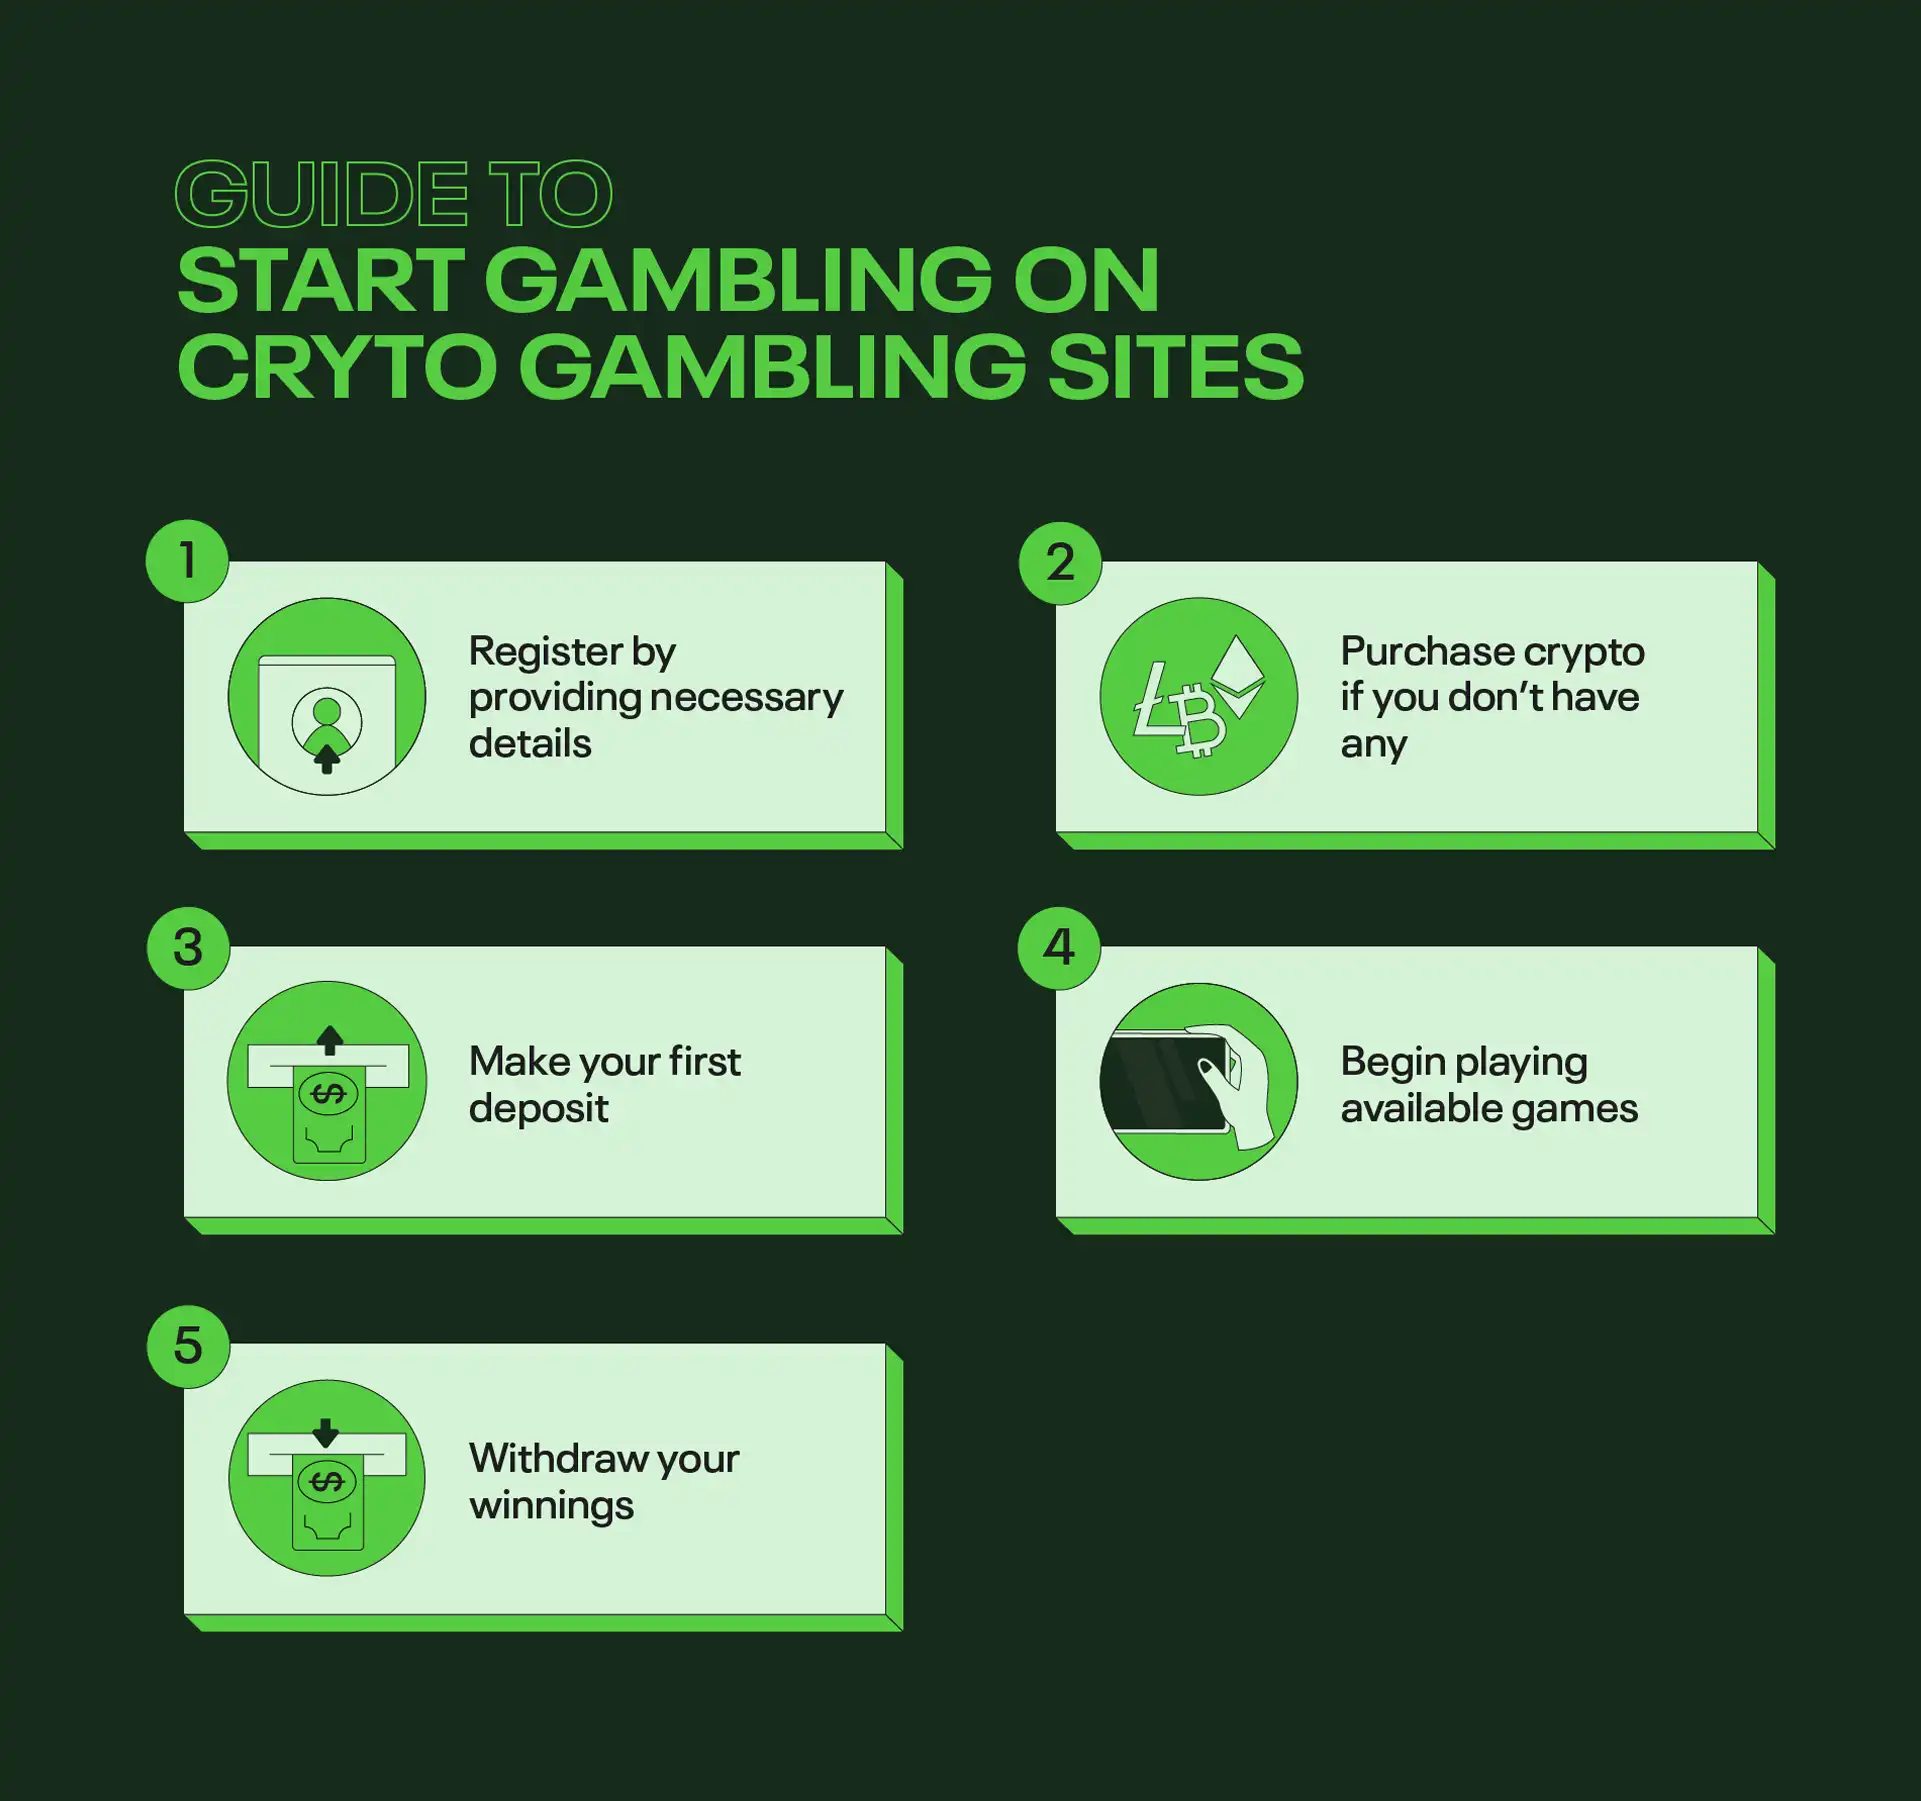 Guide to starting on crypto gambling sites